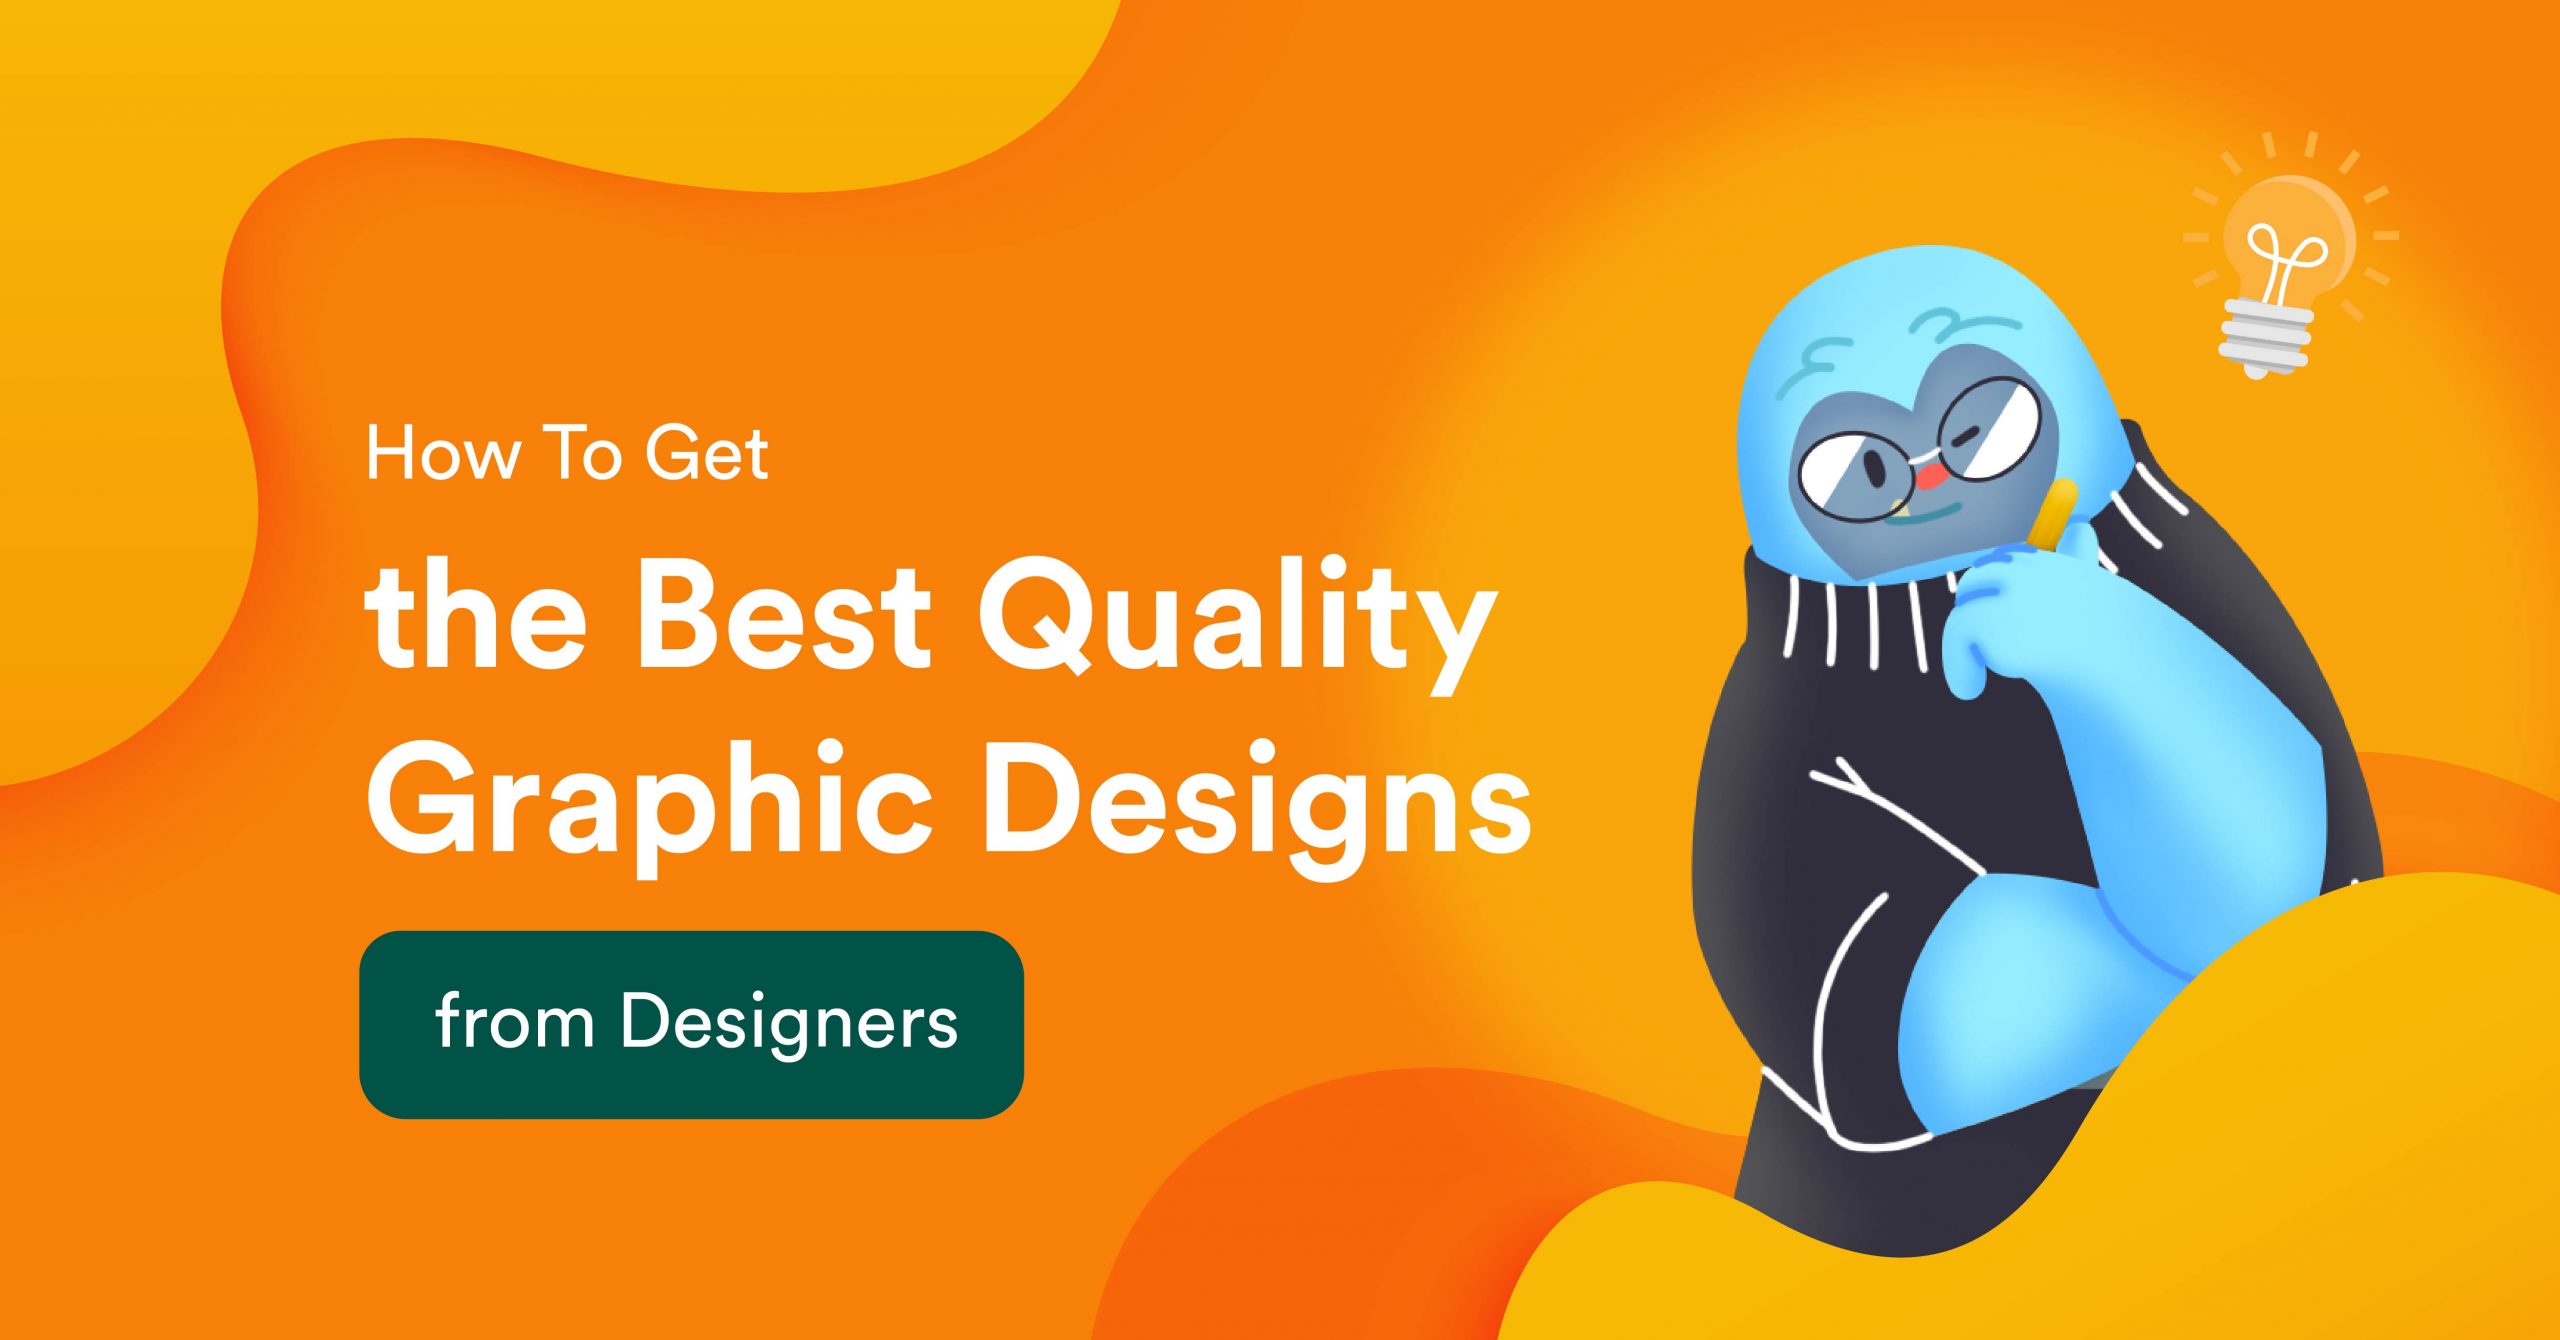 How To Get The Best Quality Graphic Designs from Designers